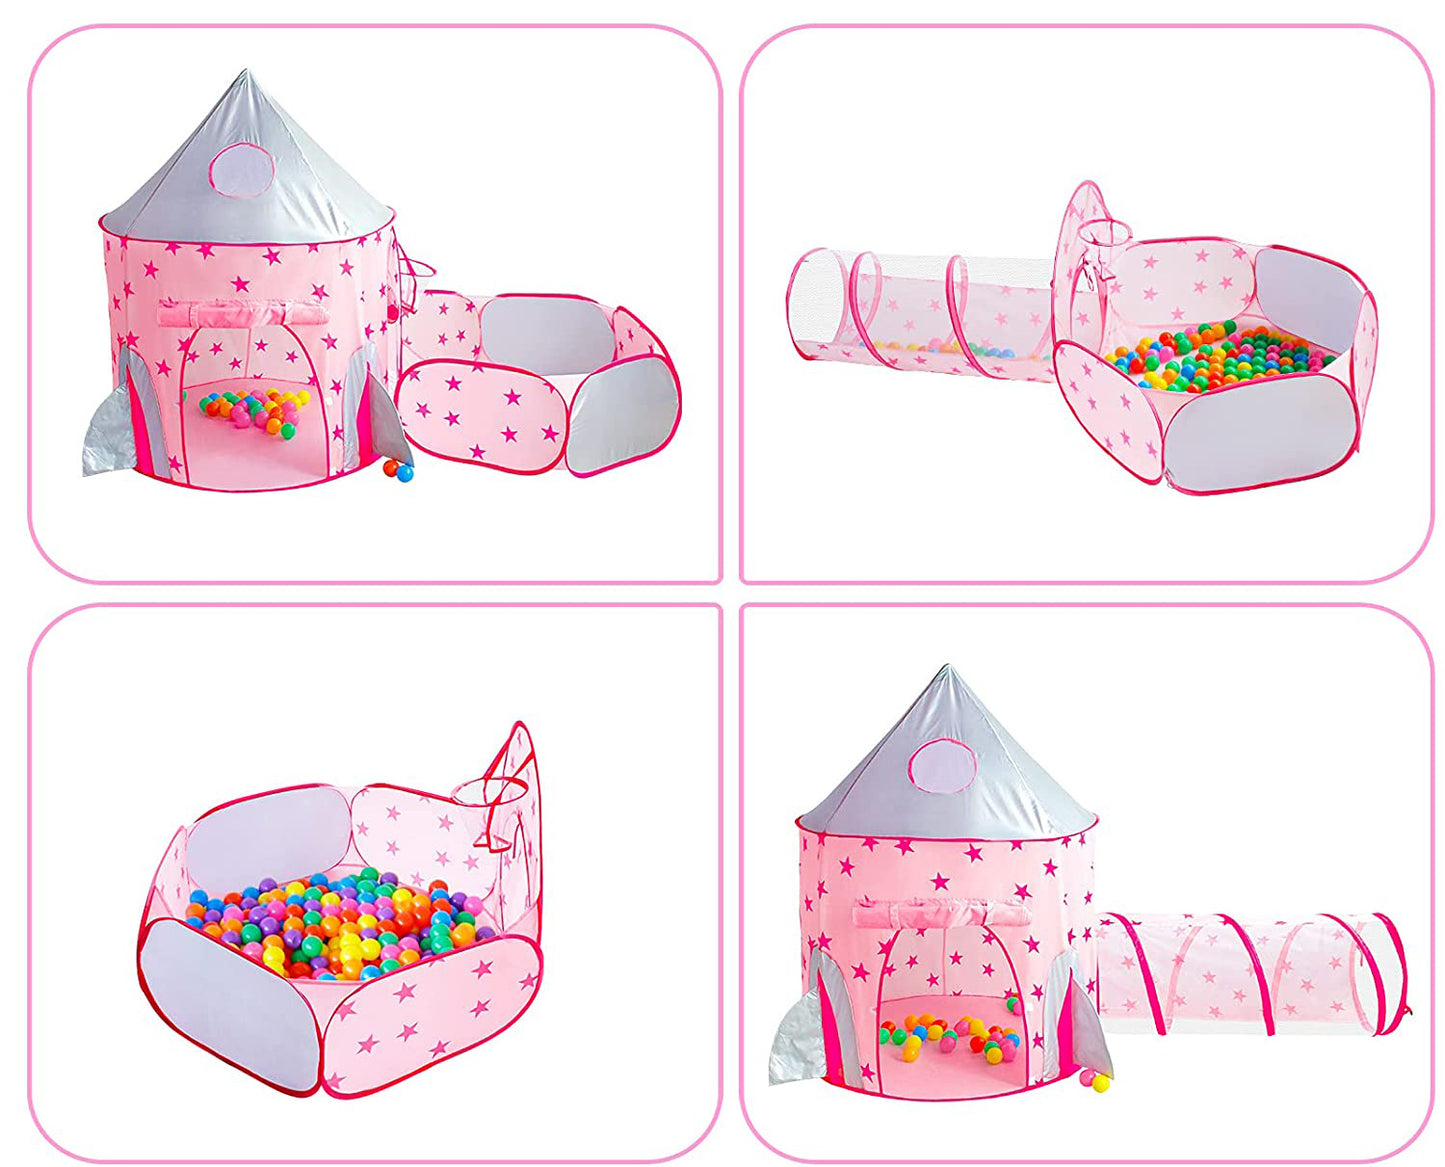 Piggy Poo and Crew Pop Up Play Tunnel and Ball Pit Game - Comes with 50 Balls